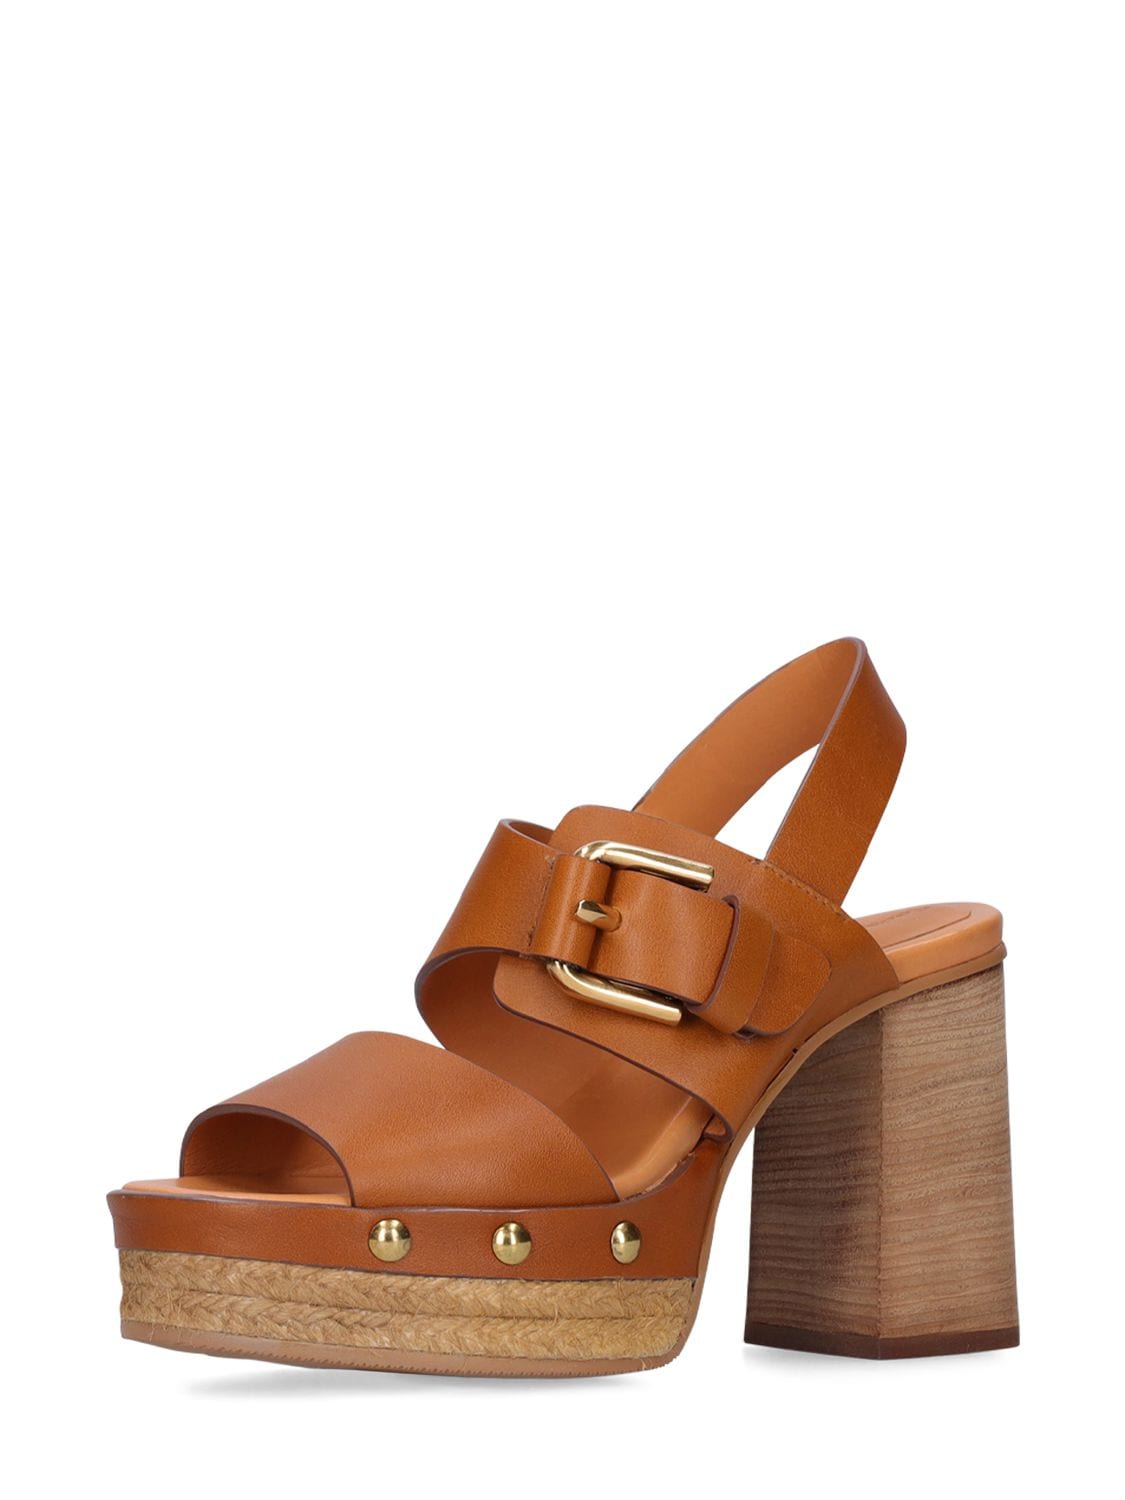 Shop See By Chloé 105mm Joline Leather Platform Sandals In Tan